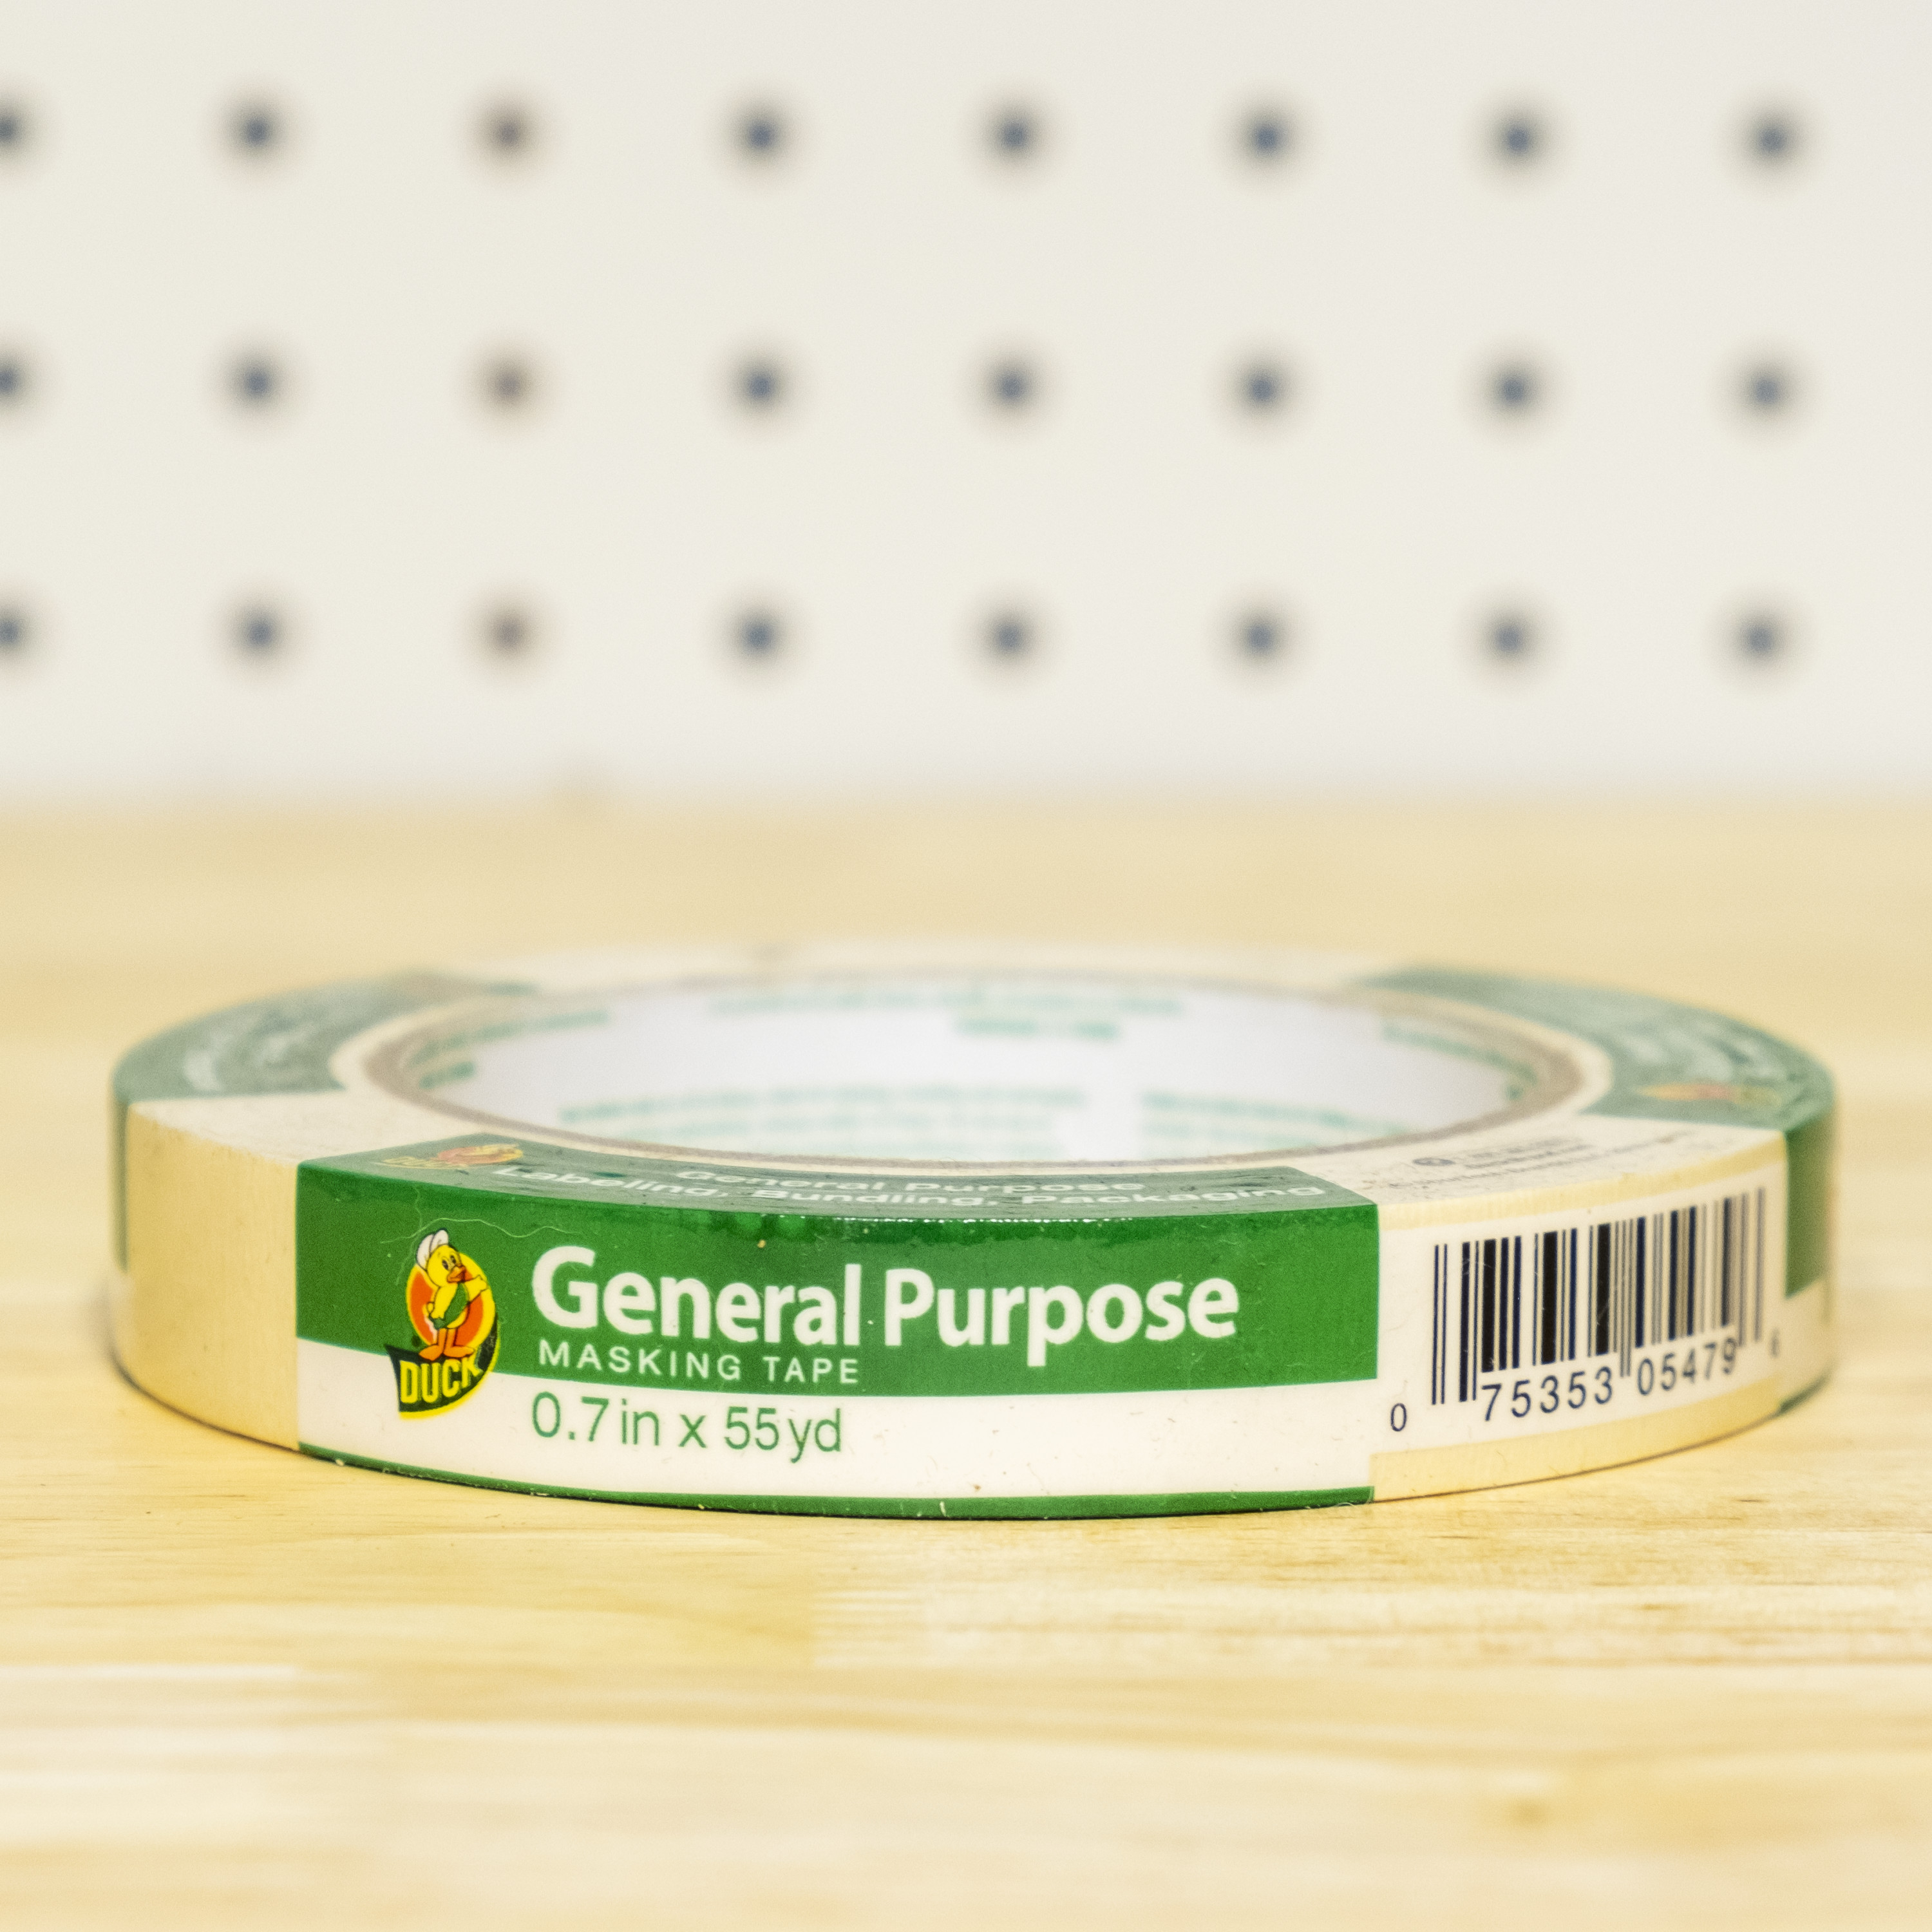 Duck Brand .7 in. x 55 yd. Beige General Purpose Masking Tape - image 4 of 10